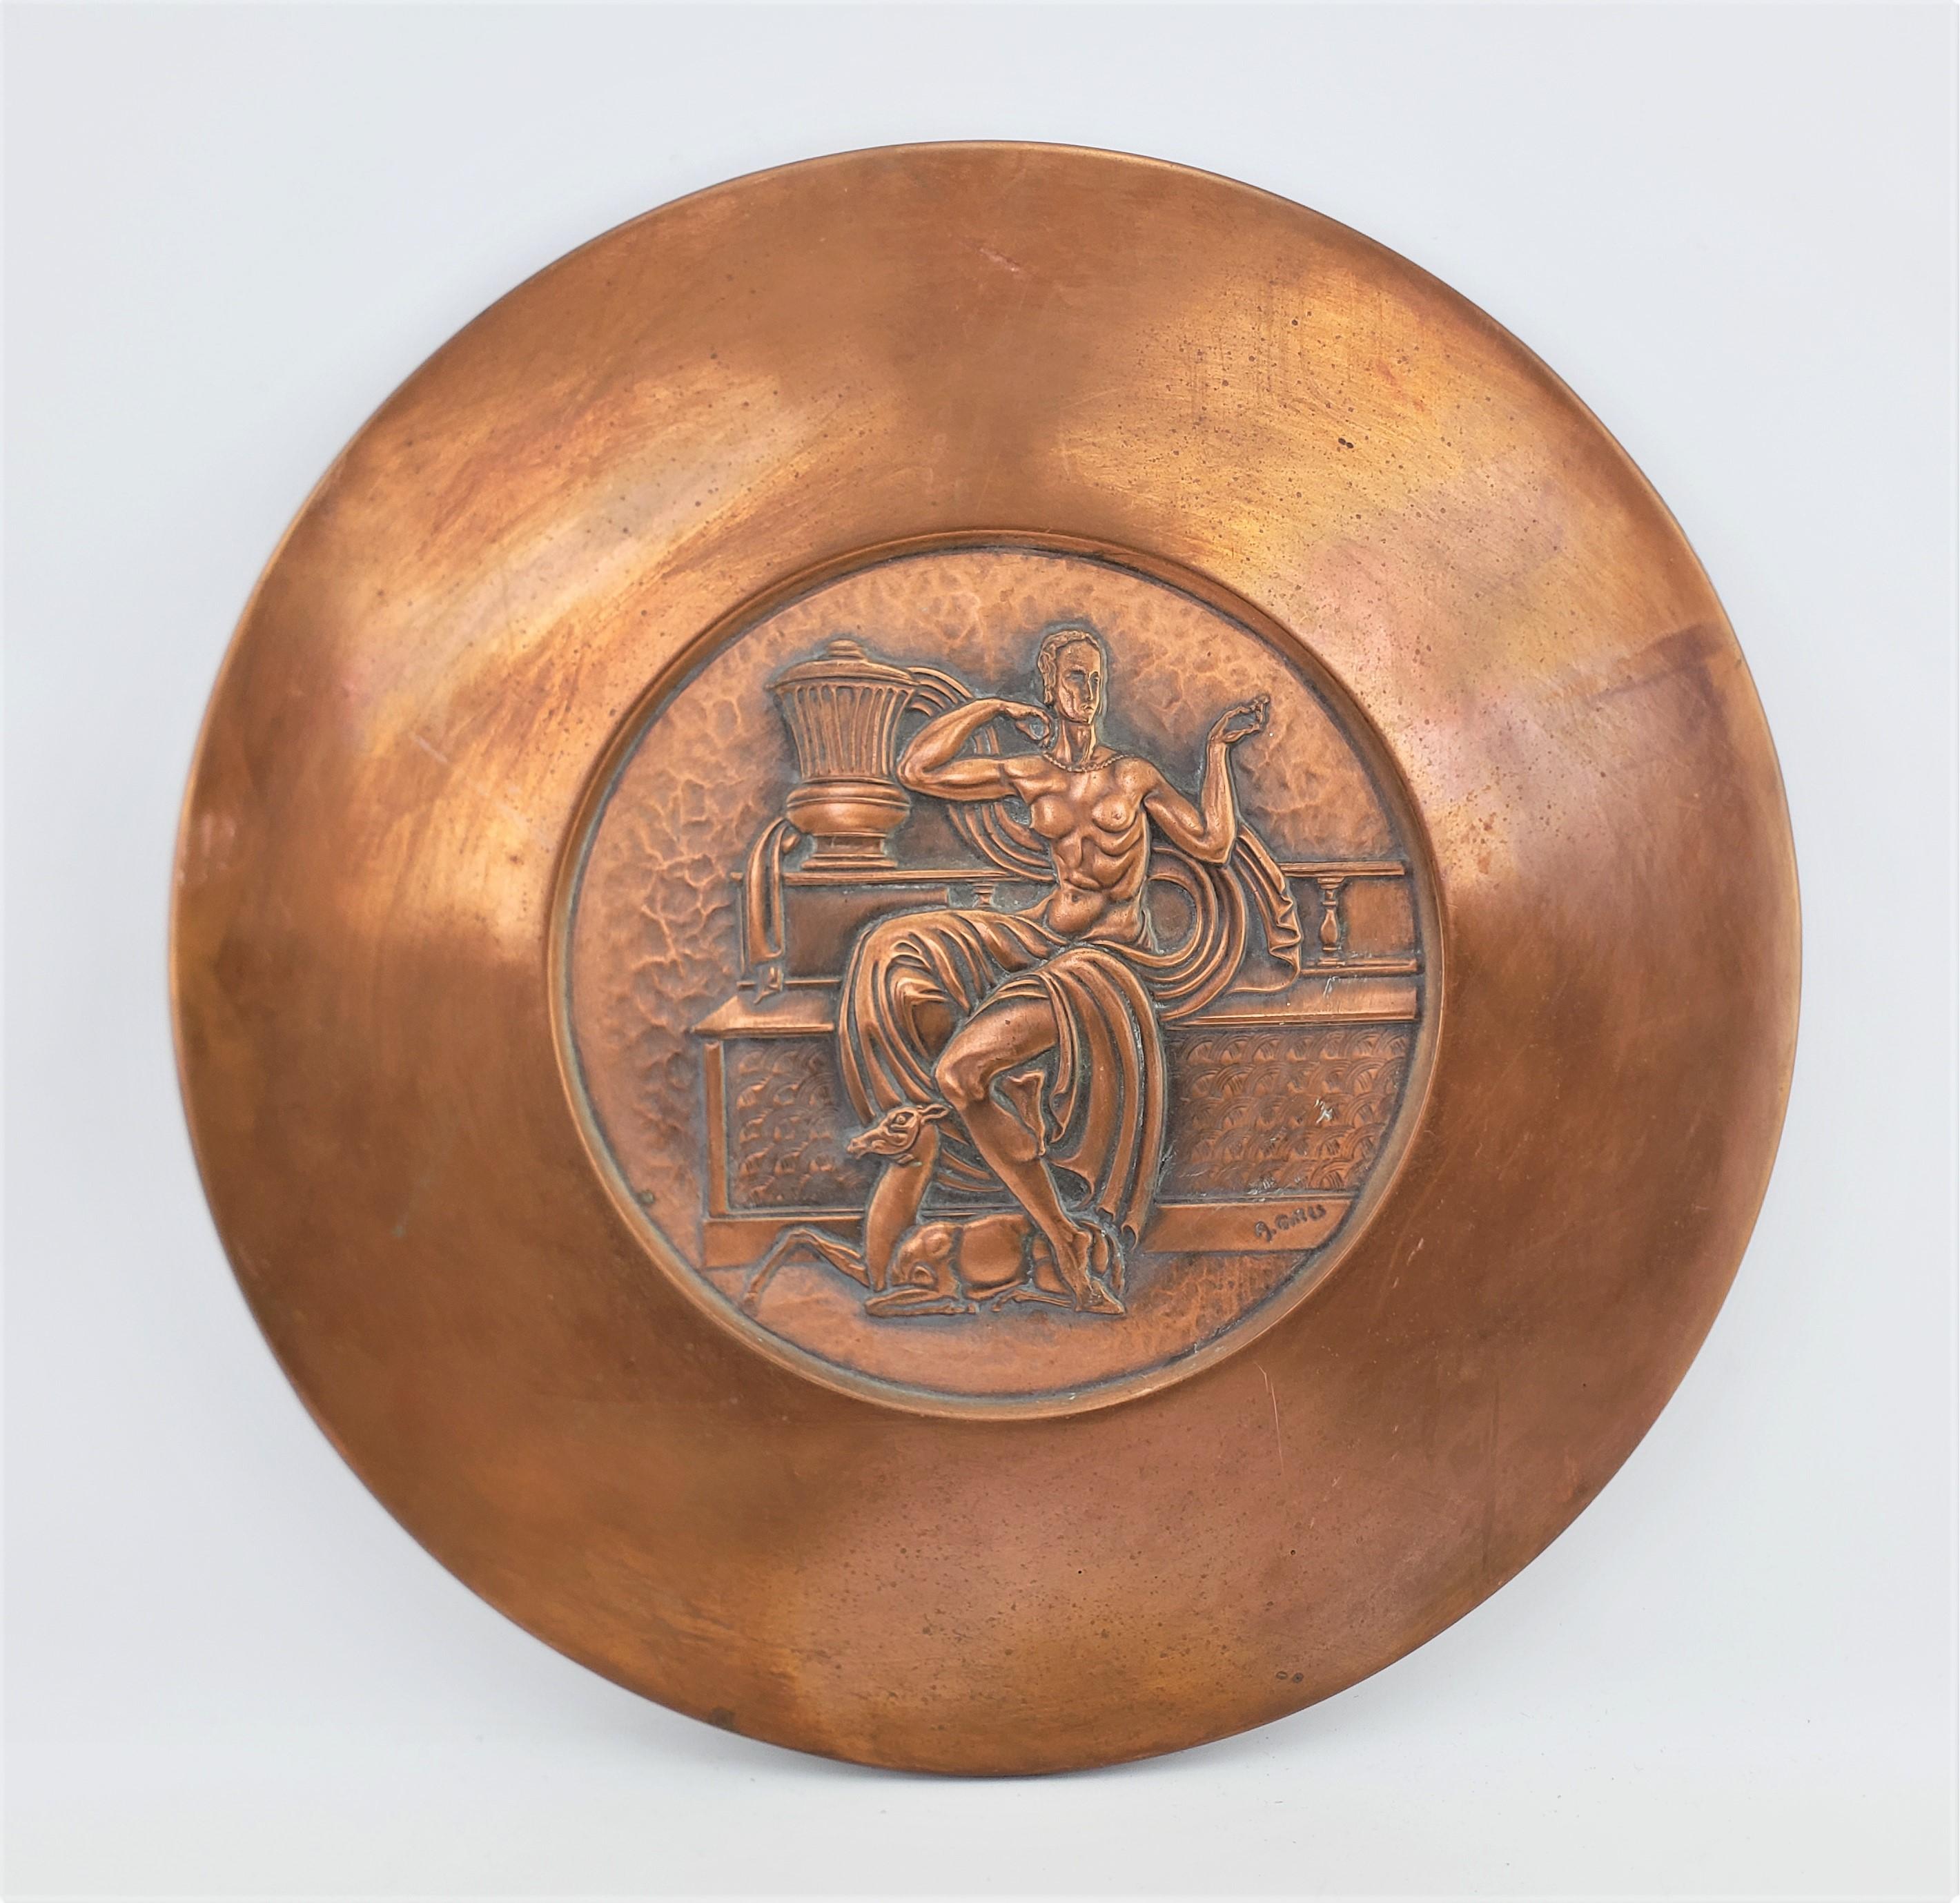 This large copper wall hanging was done by the well known metal worker Albert Gilles from Canada and dates to approximately 1920 and done in an Art Deco style. The round convex wall plaque is done in copper with a repousse disc in the center